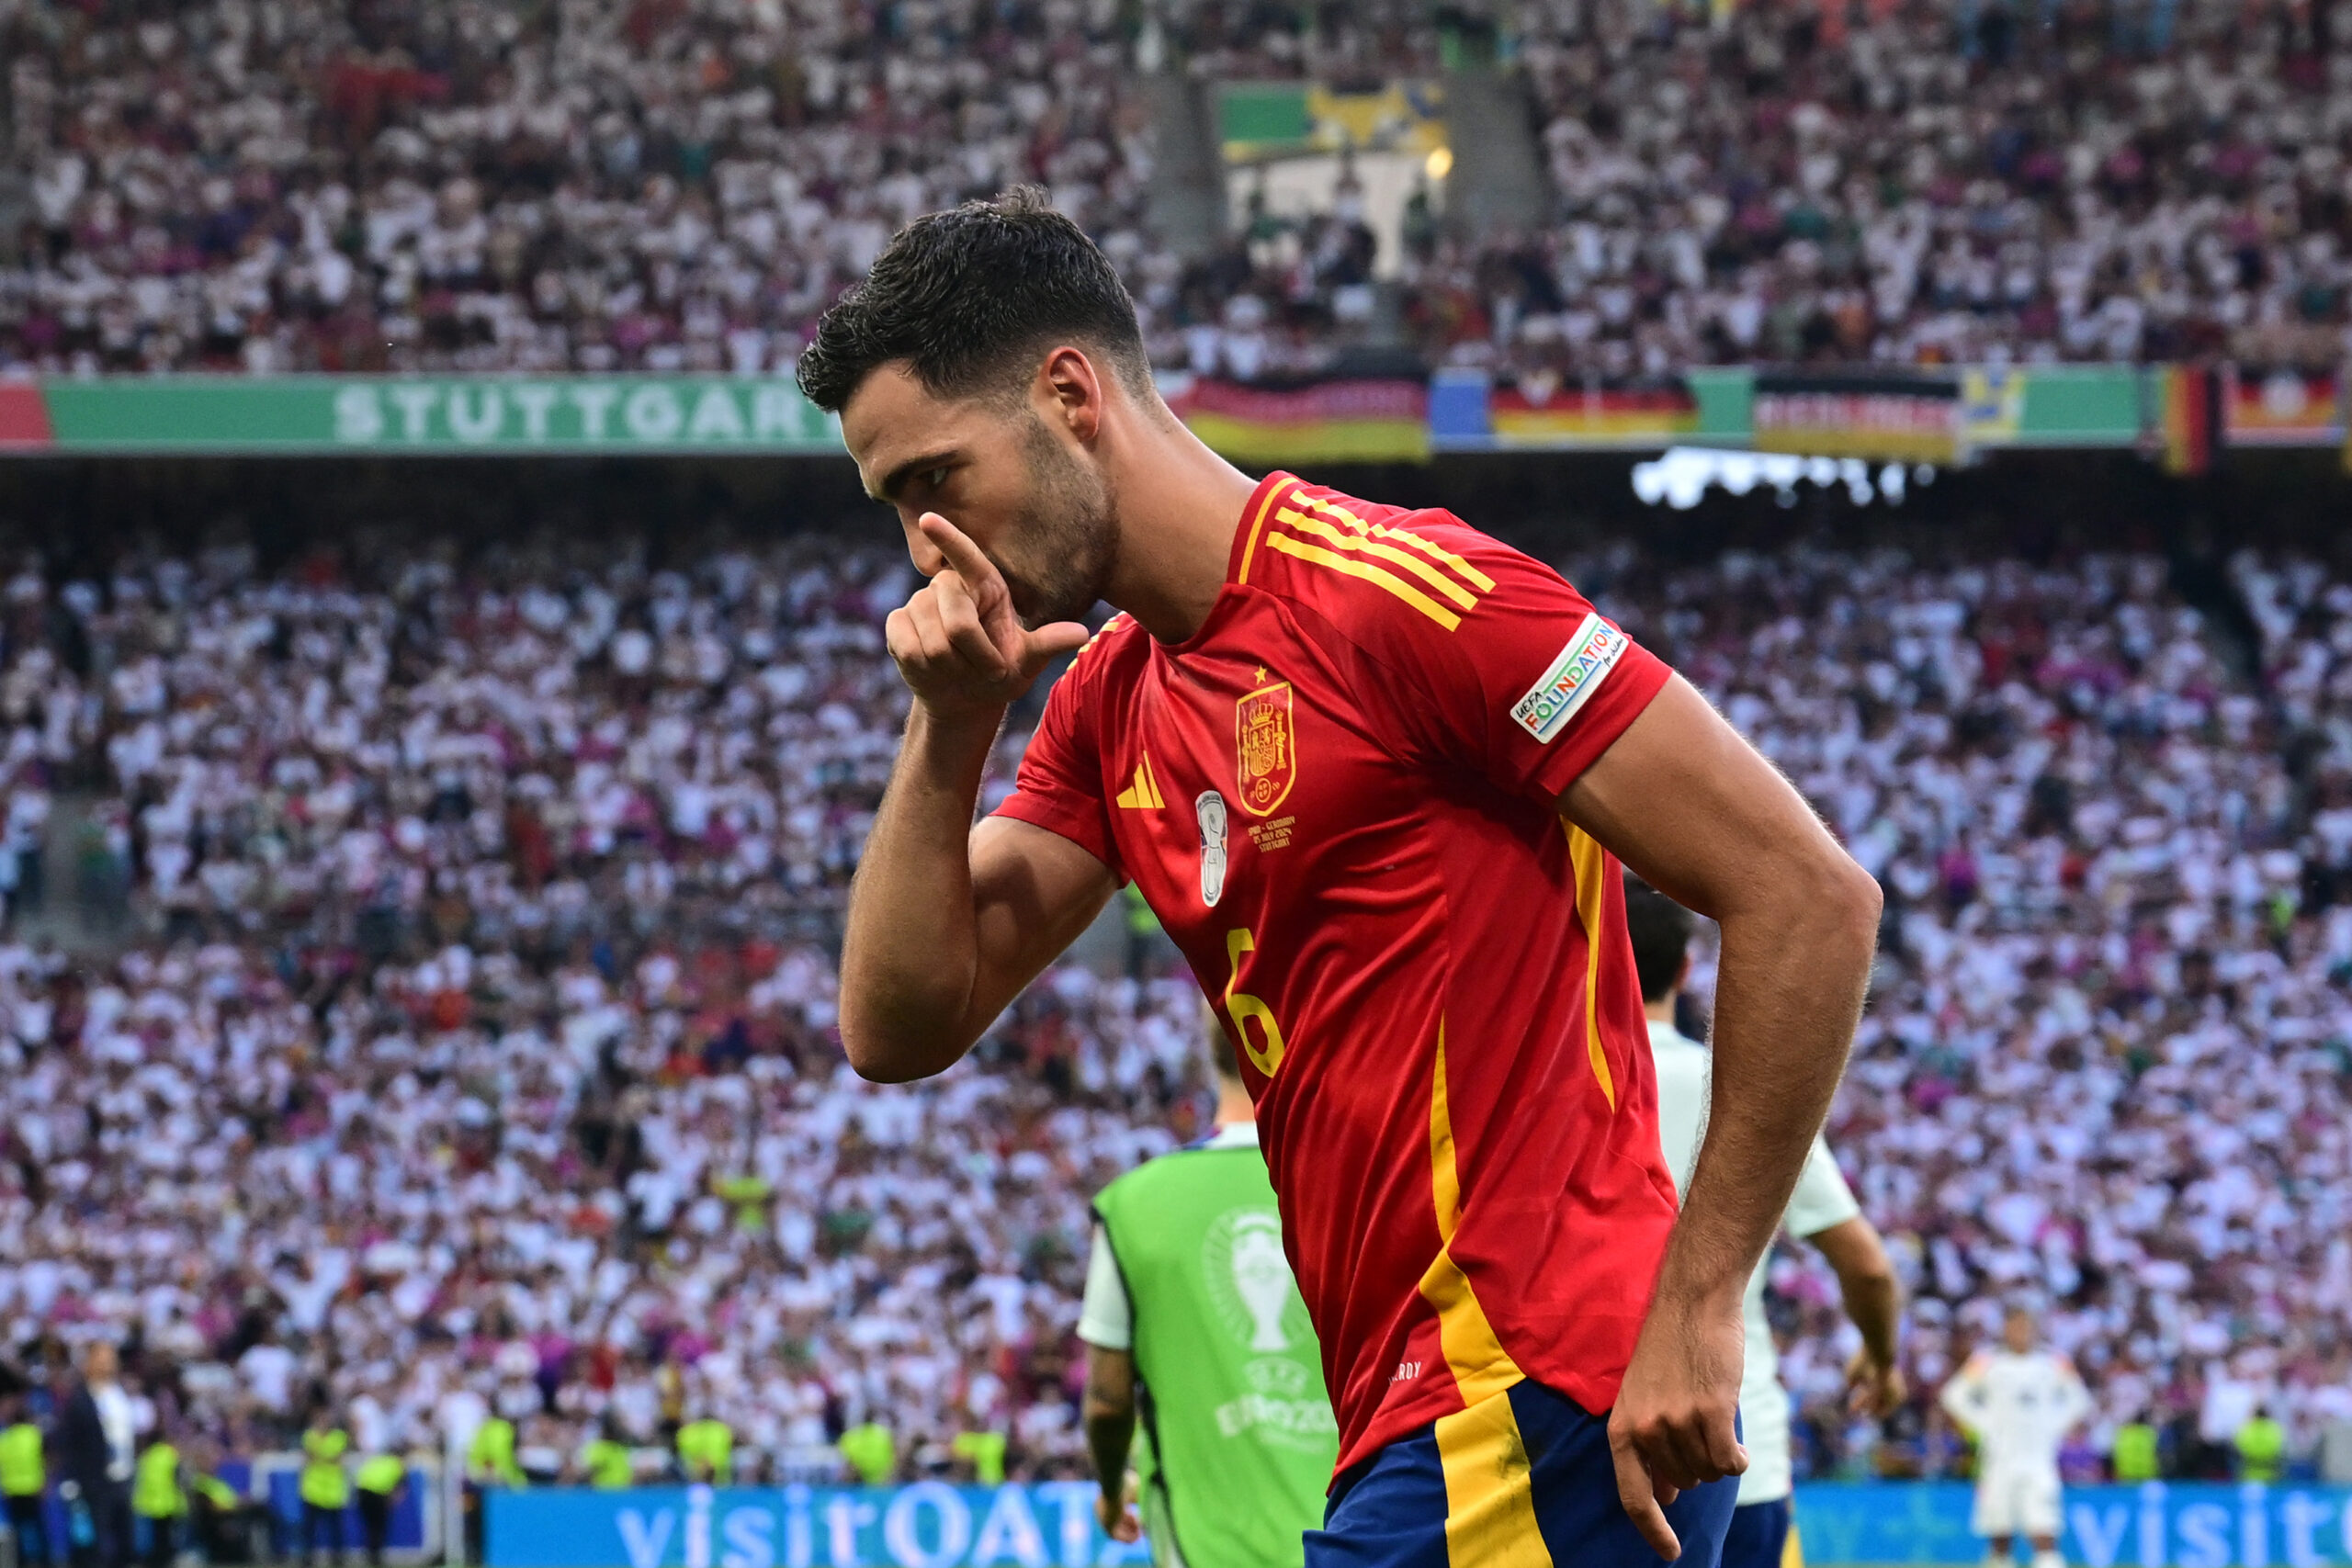 Spain's midfielder #06 Mikel Merino celebrates scoring his team's second goal during the UEFA Euro 2024 quarter-final football match between Spain and Germany at the Stuttgart Arena in Stuttgart on July 5, 2024.